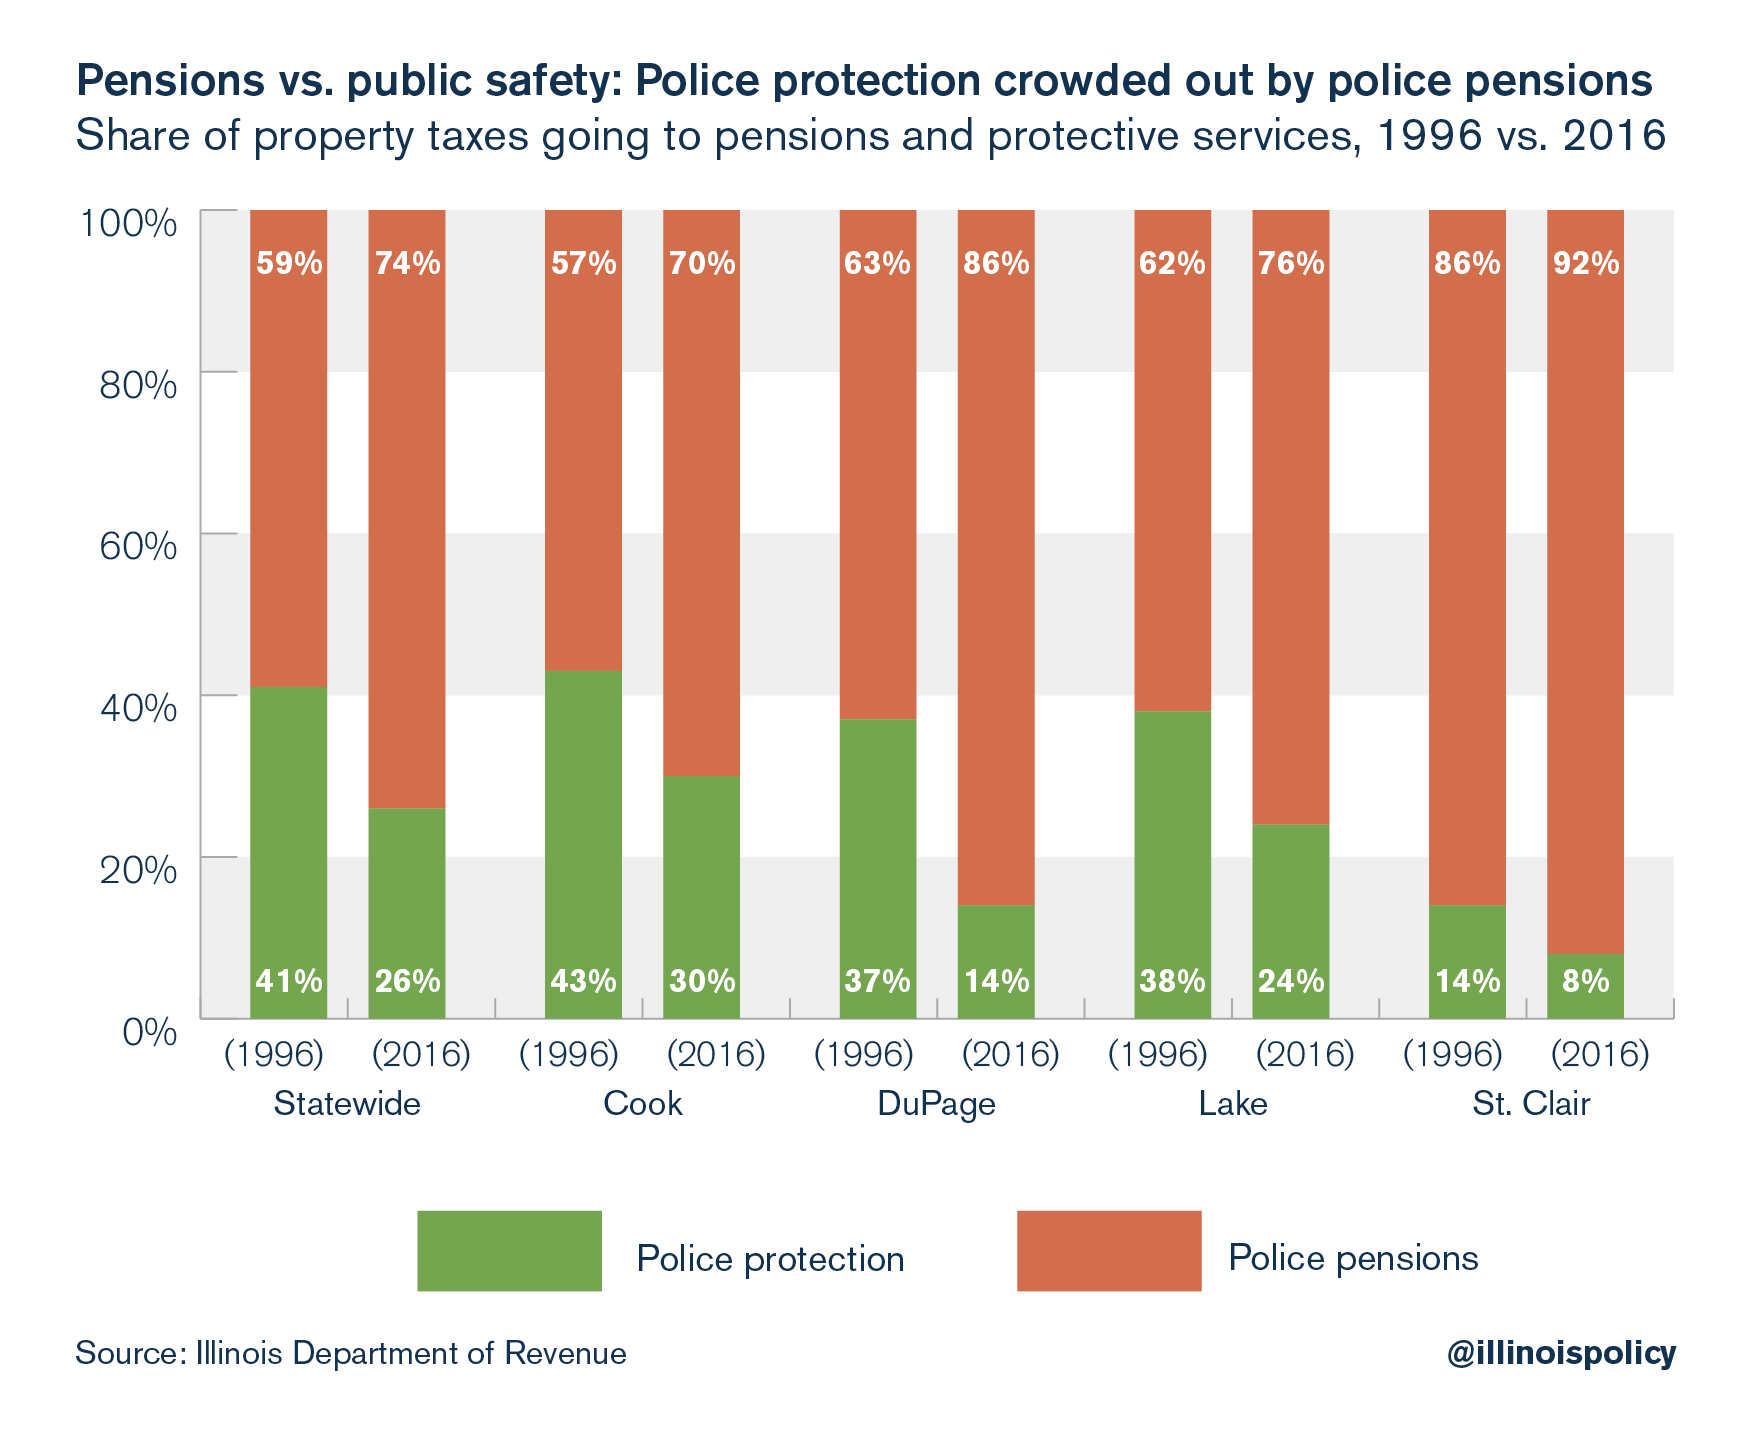 Pensions vs. public safety: Police protection crowded out by police pensions